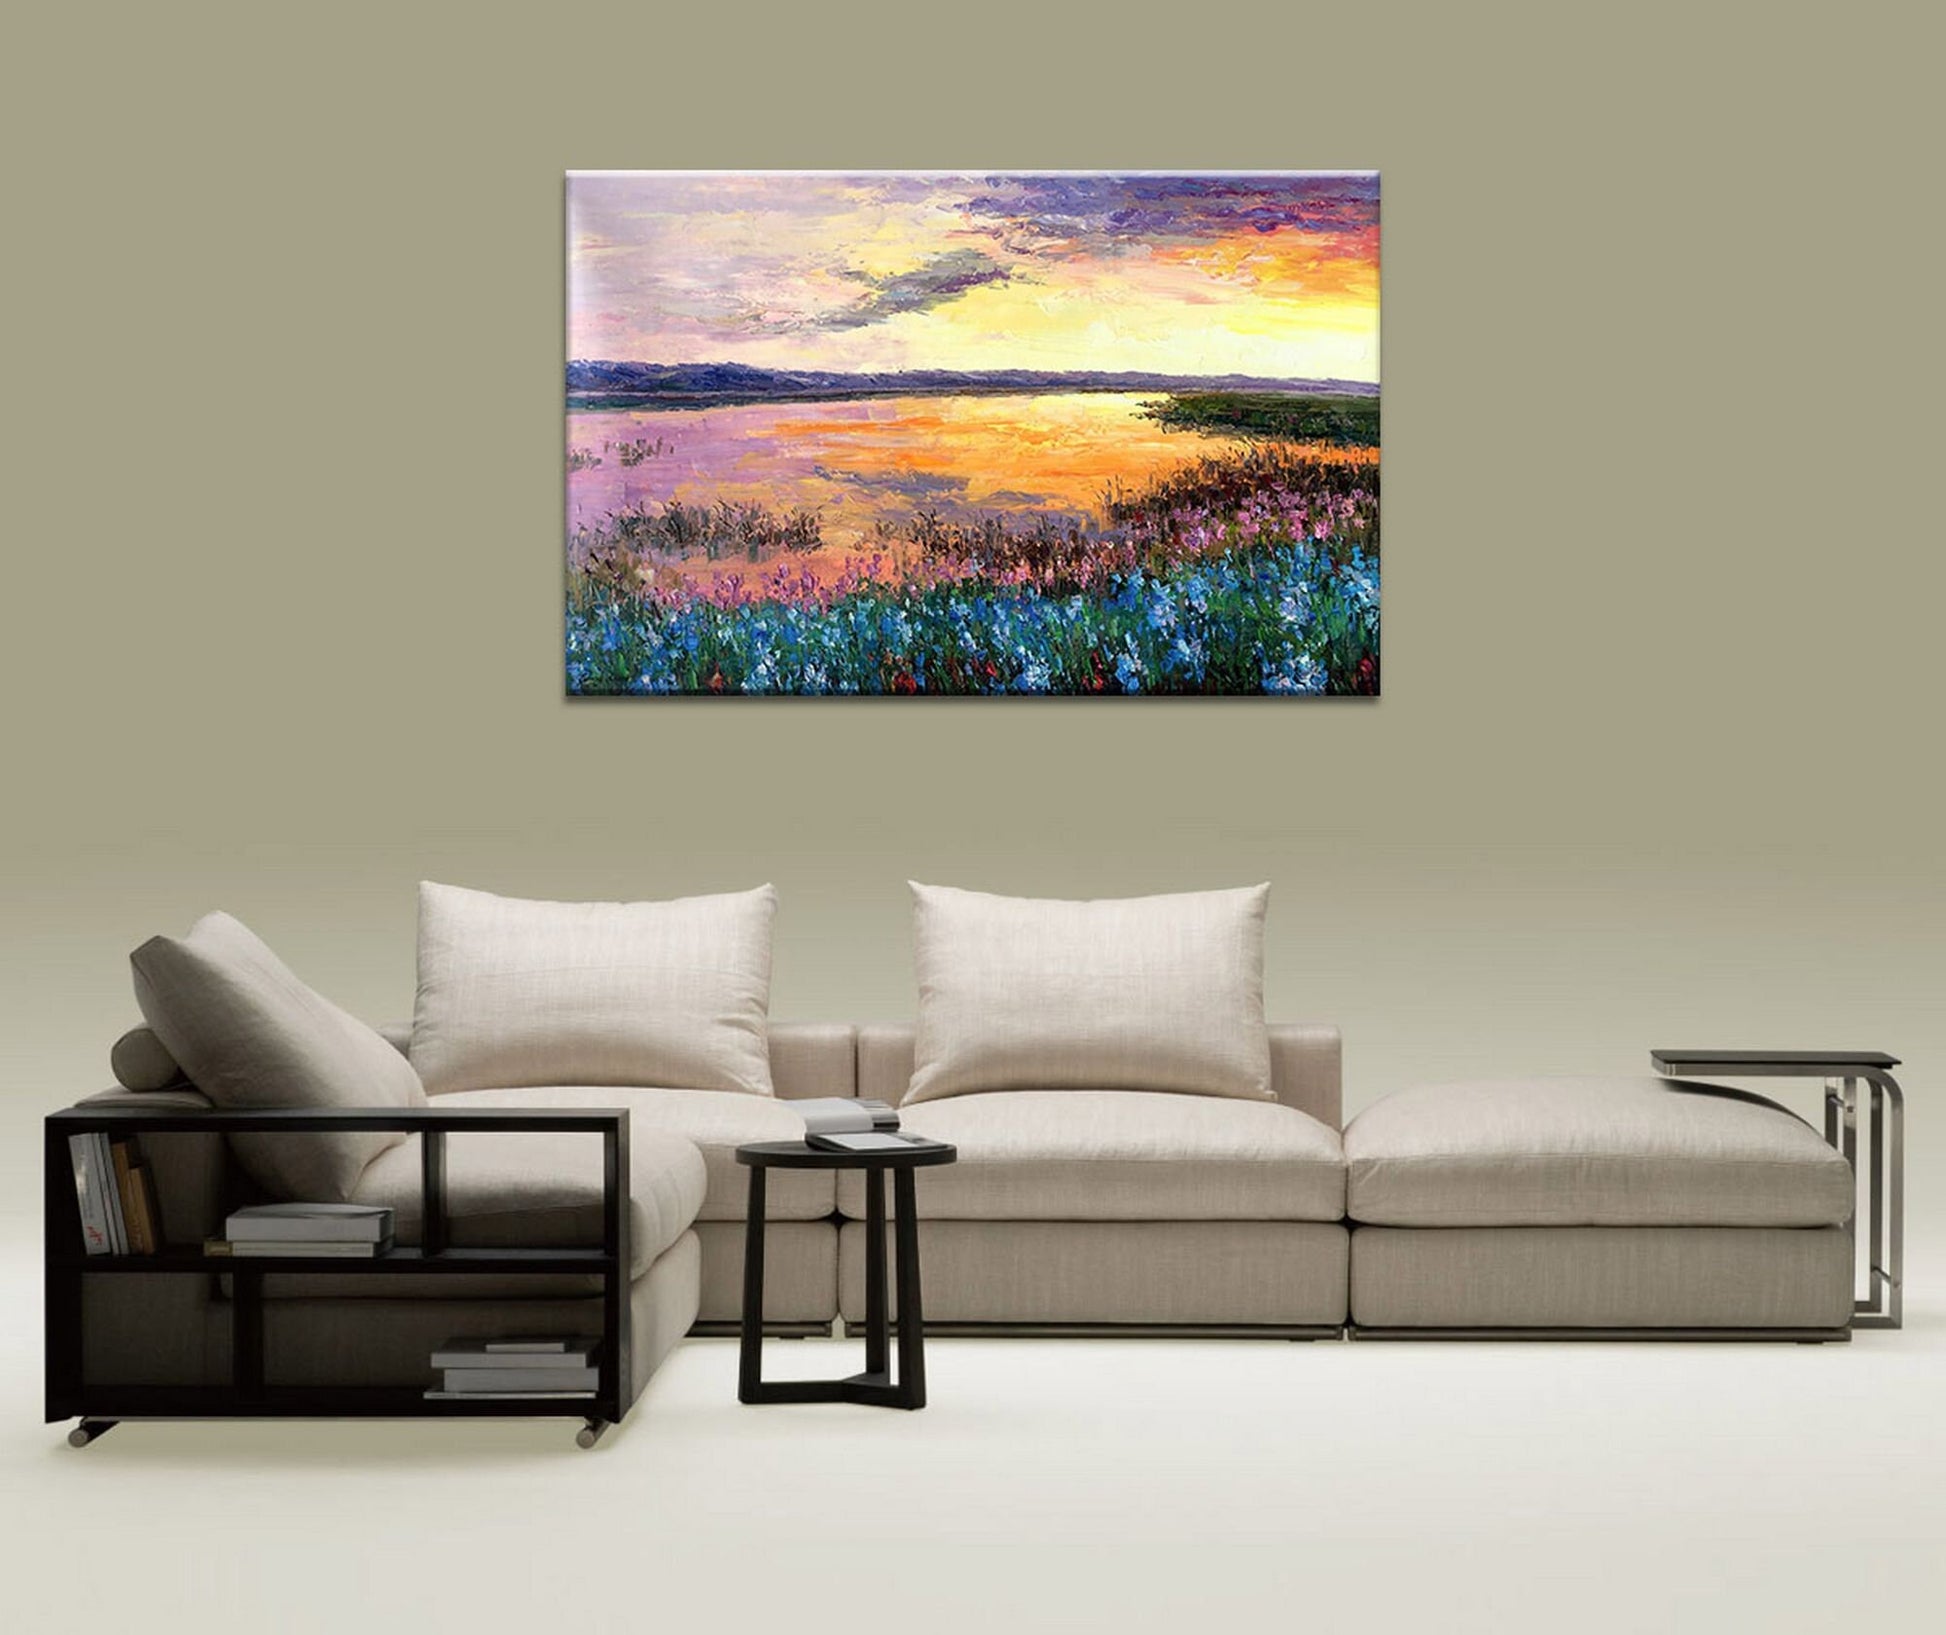 Large Oil Painting, Sunset by the River, Original Painting, Contemporary Painting, Landscape Painting, Large Canvas Wall Art, Wall Decor